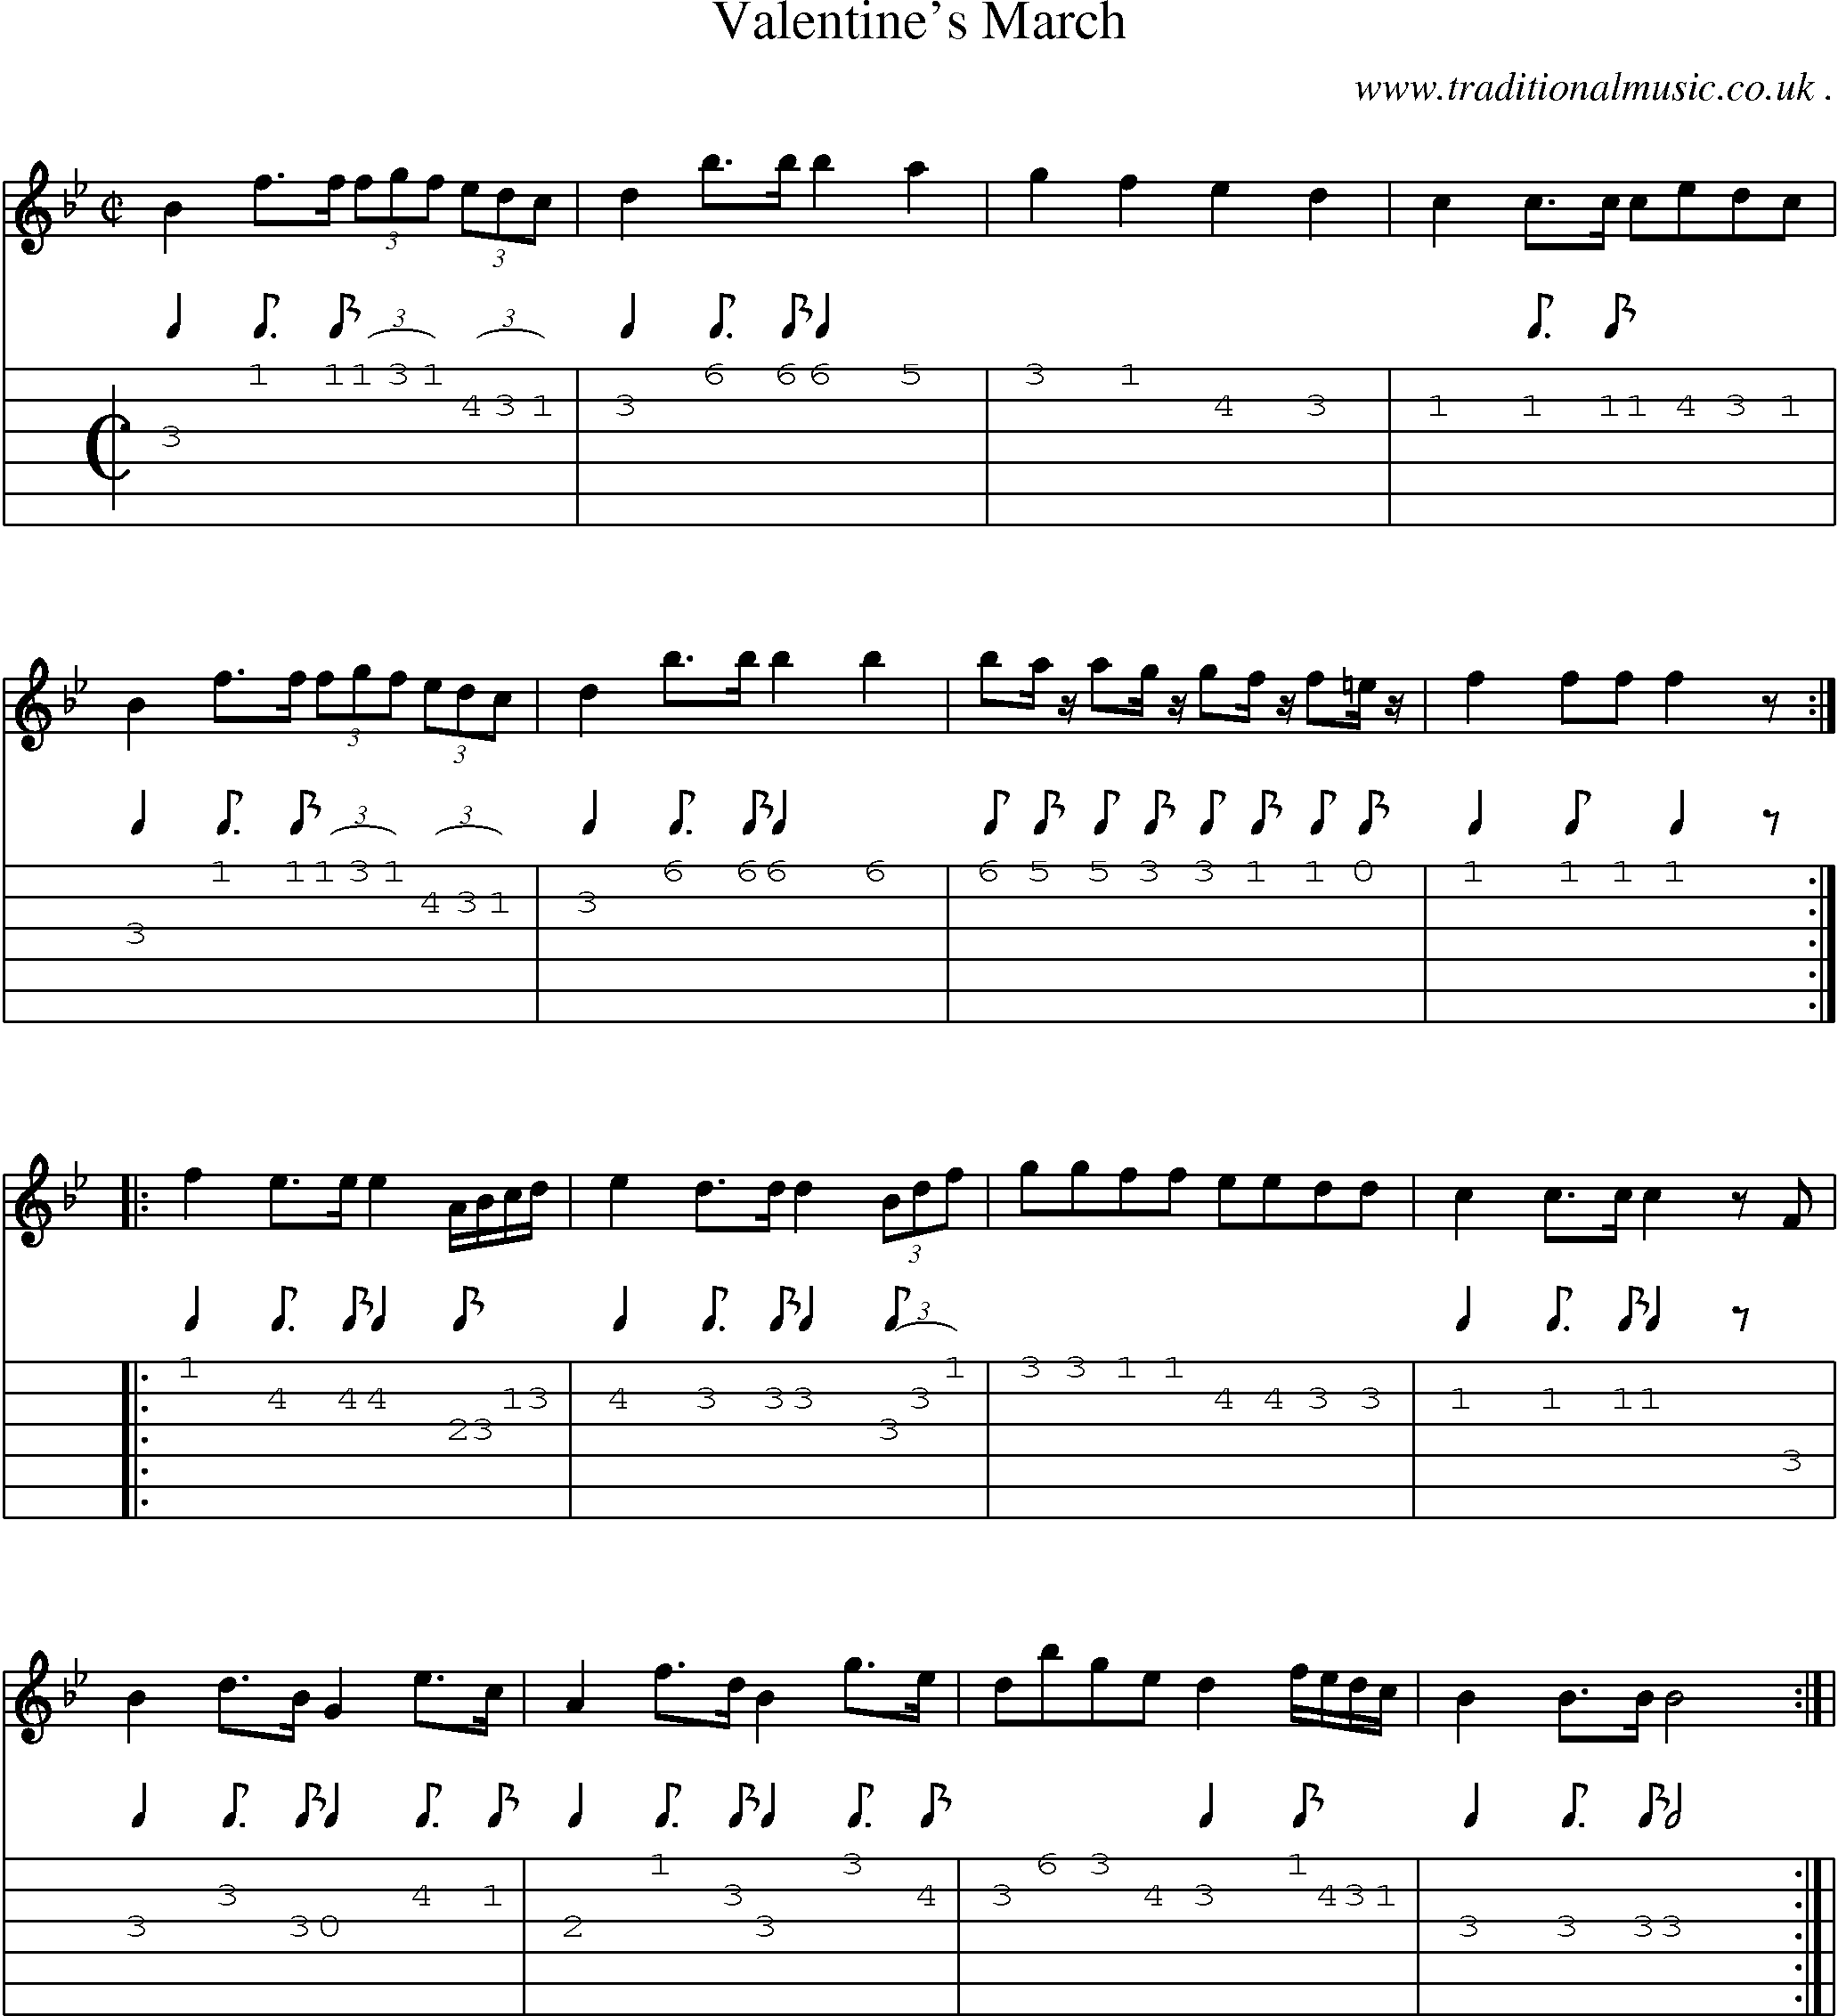 Sheet-Music and Guitar Tabs for Valentines March